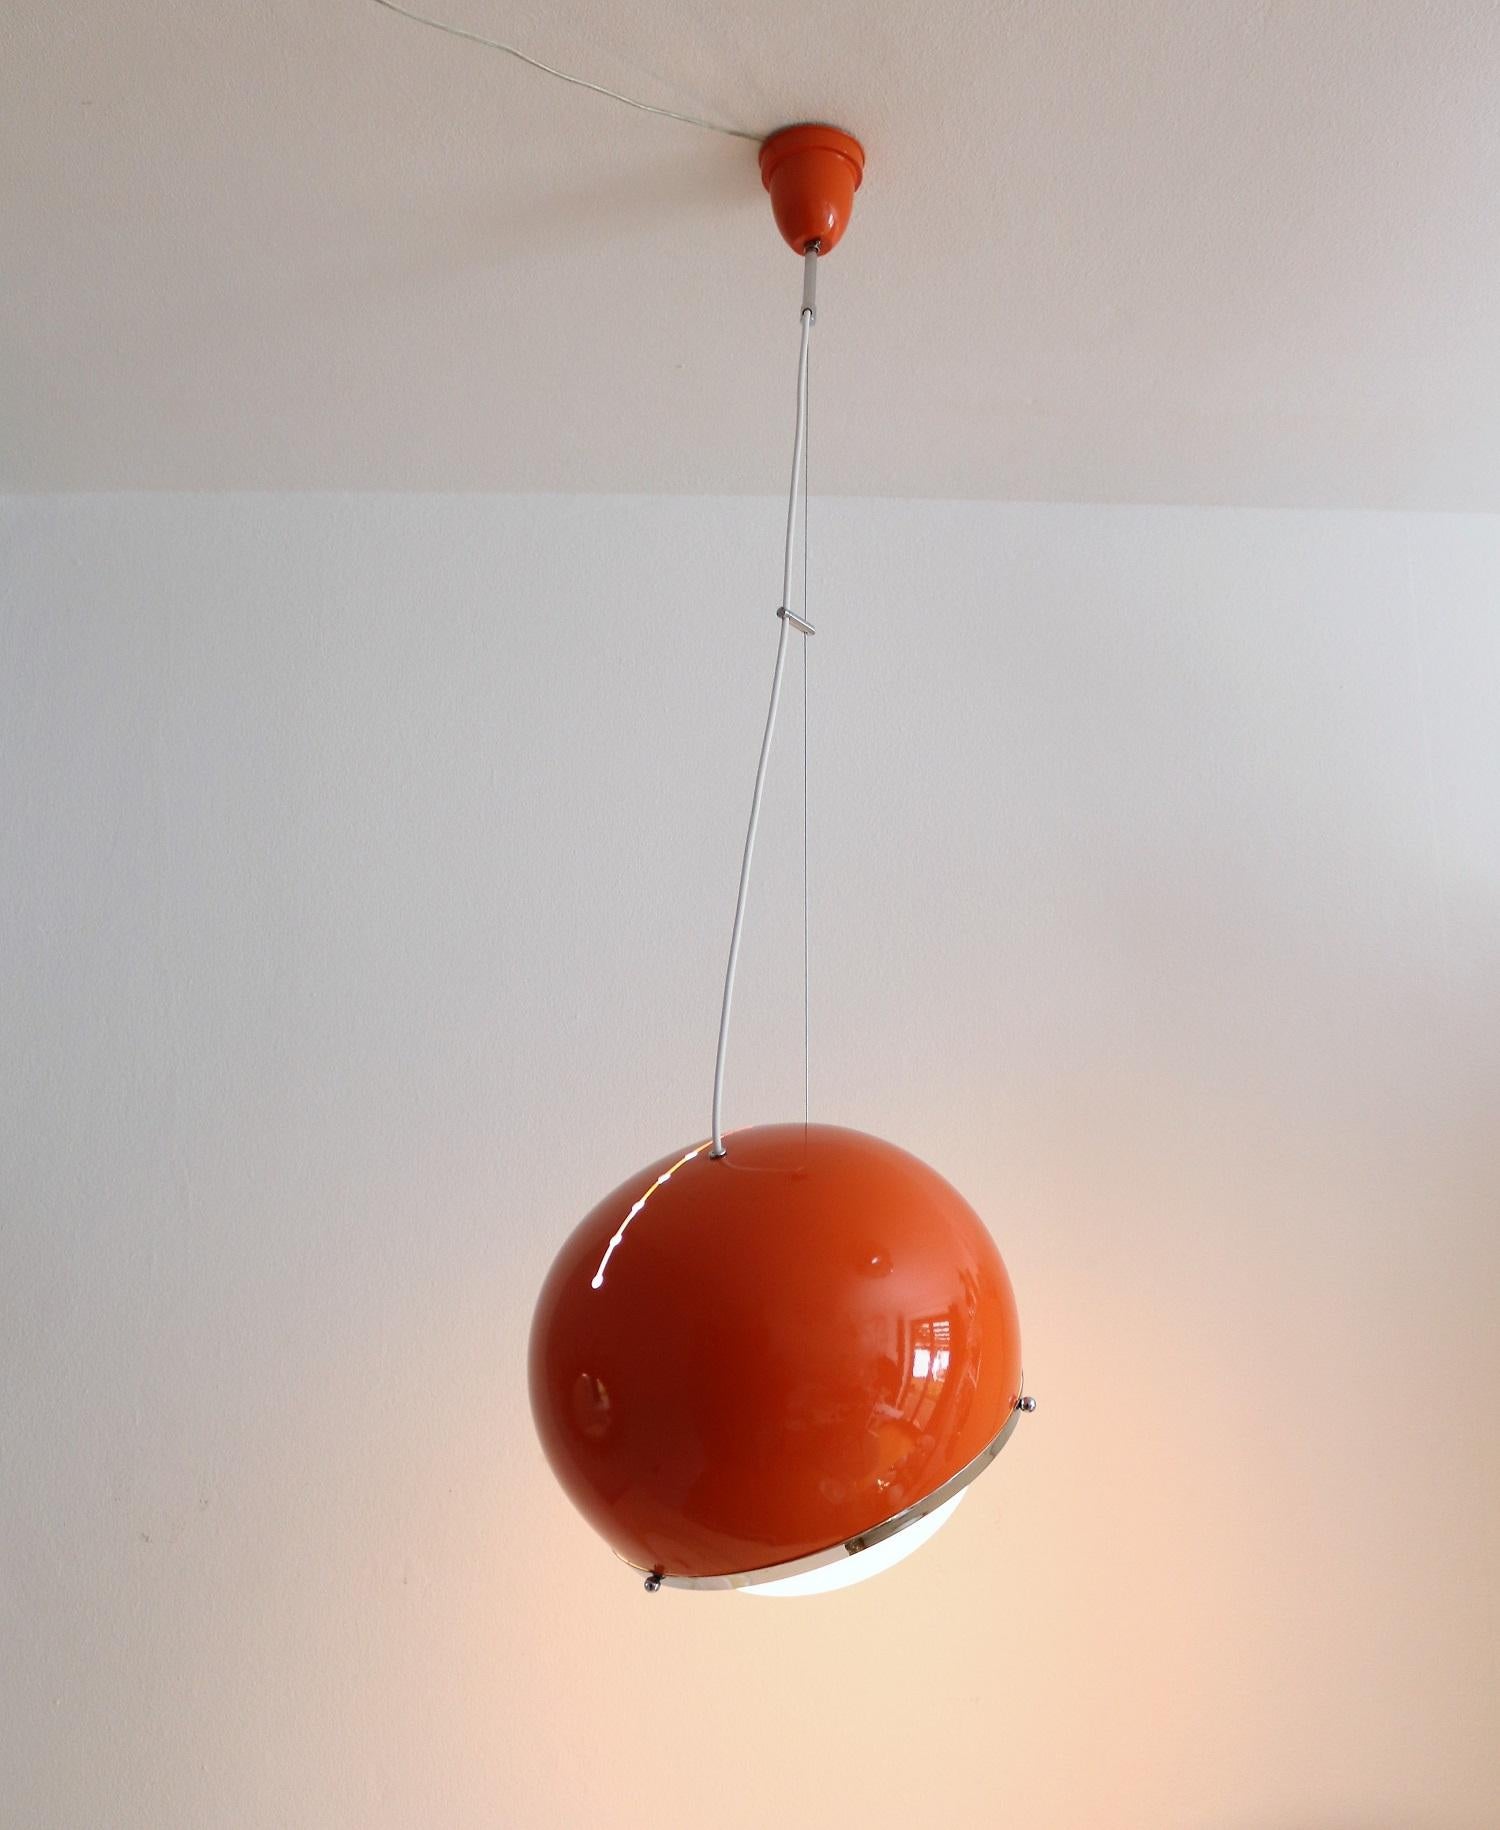 Aluminum Italian Midcentury Pendant Lamp from the Space Age in Glass and Aluminium, 1960s For Sale